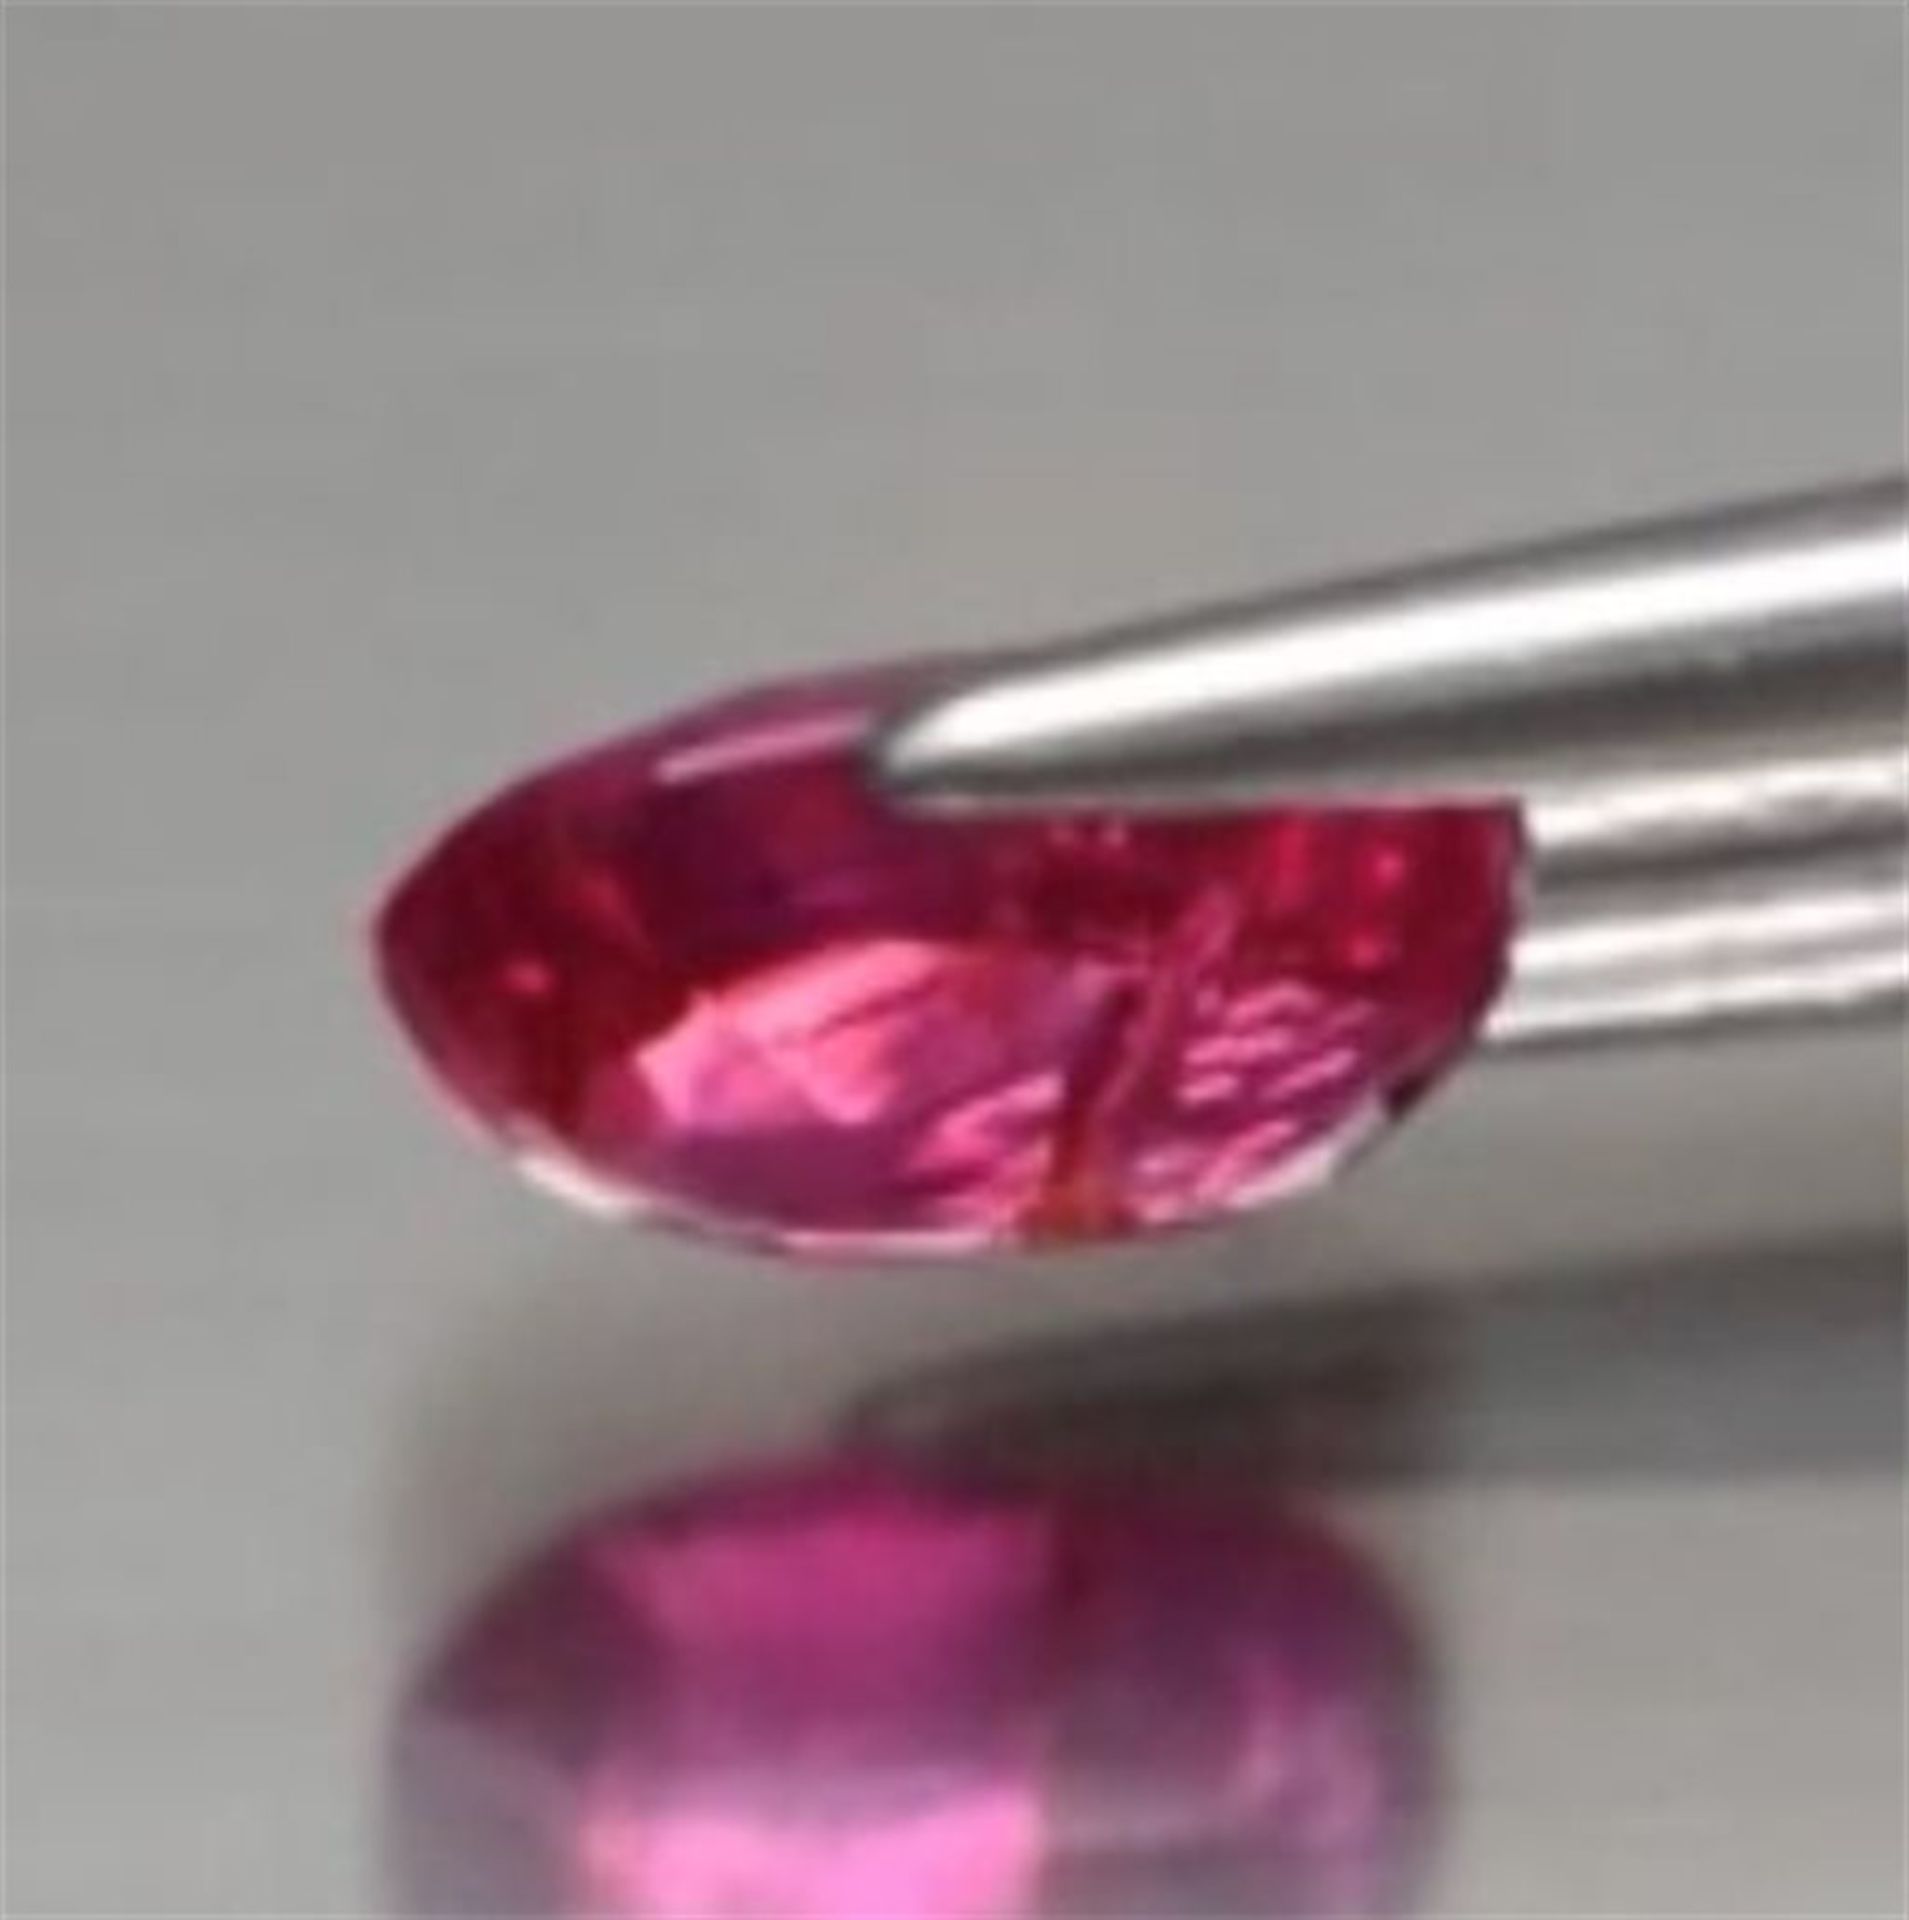 LOTUS Certified 0.99 ct. Hot Pink Sapphire MOZAMBIQUE - Image 8 of 10